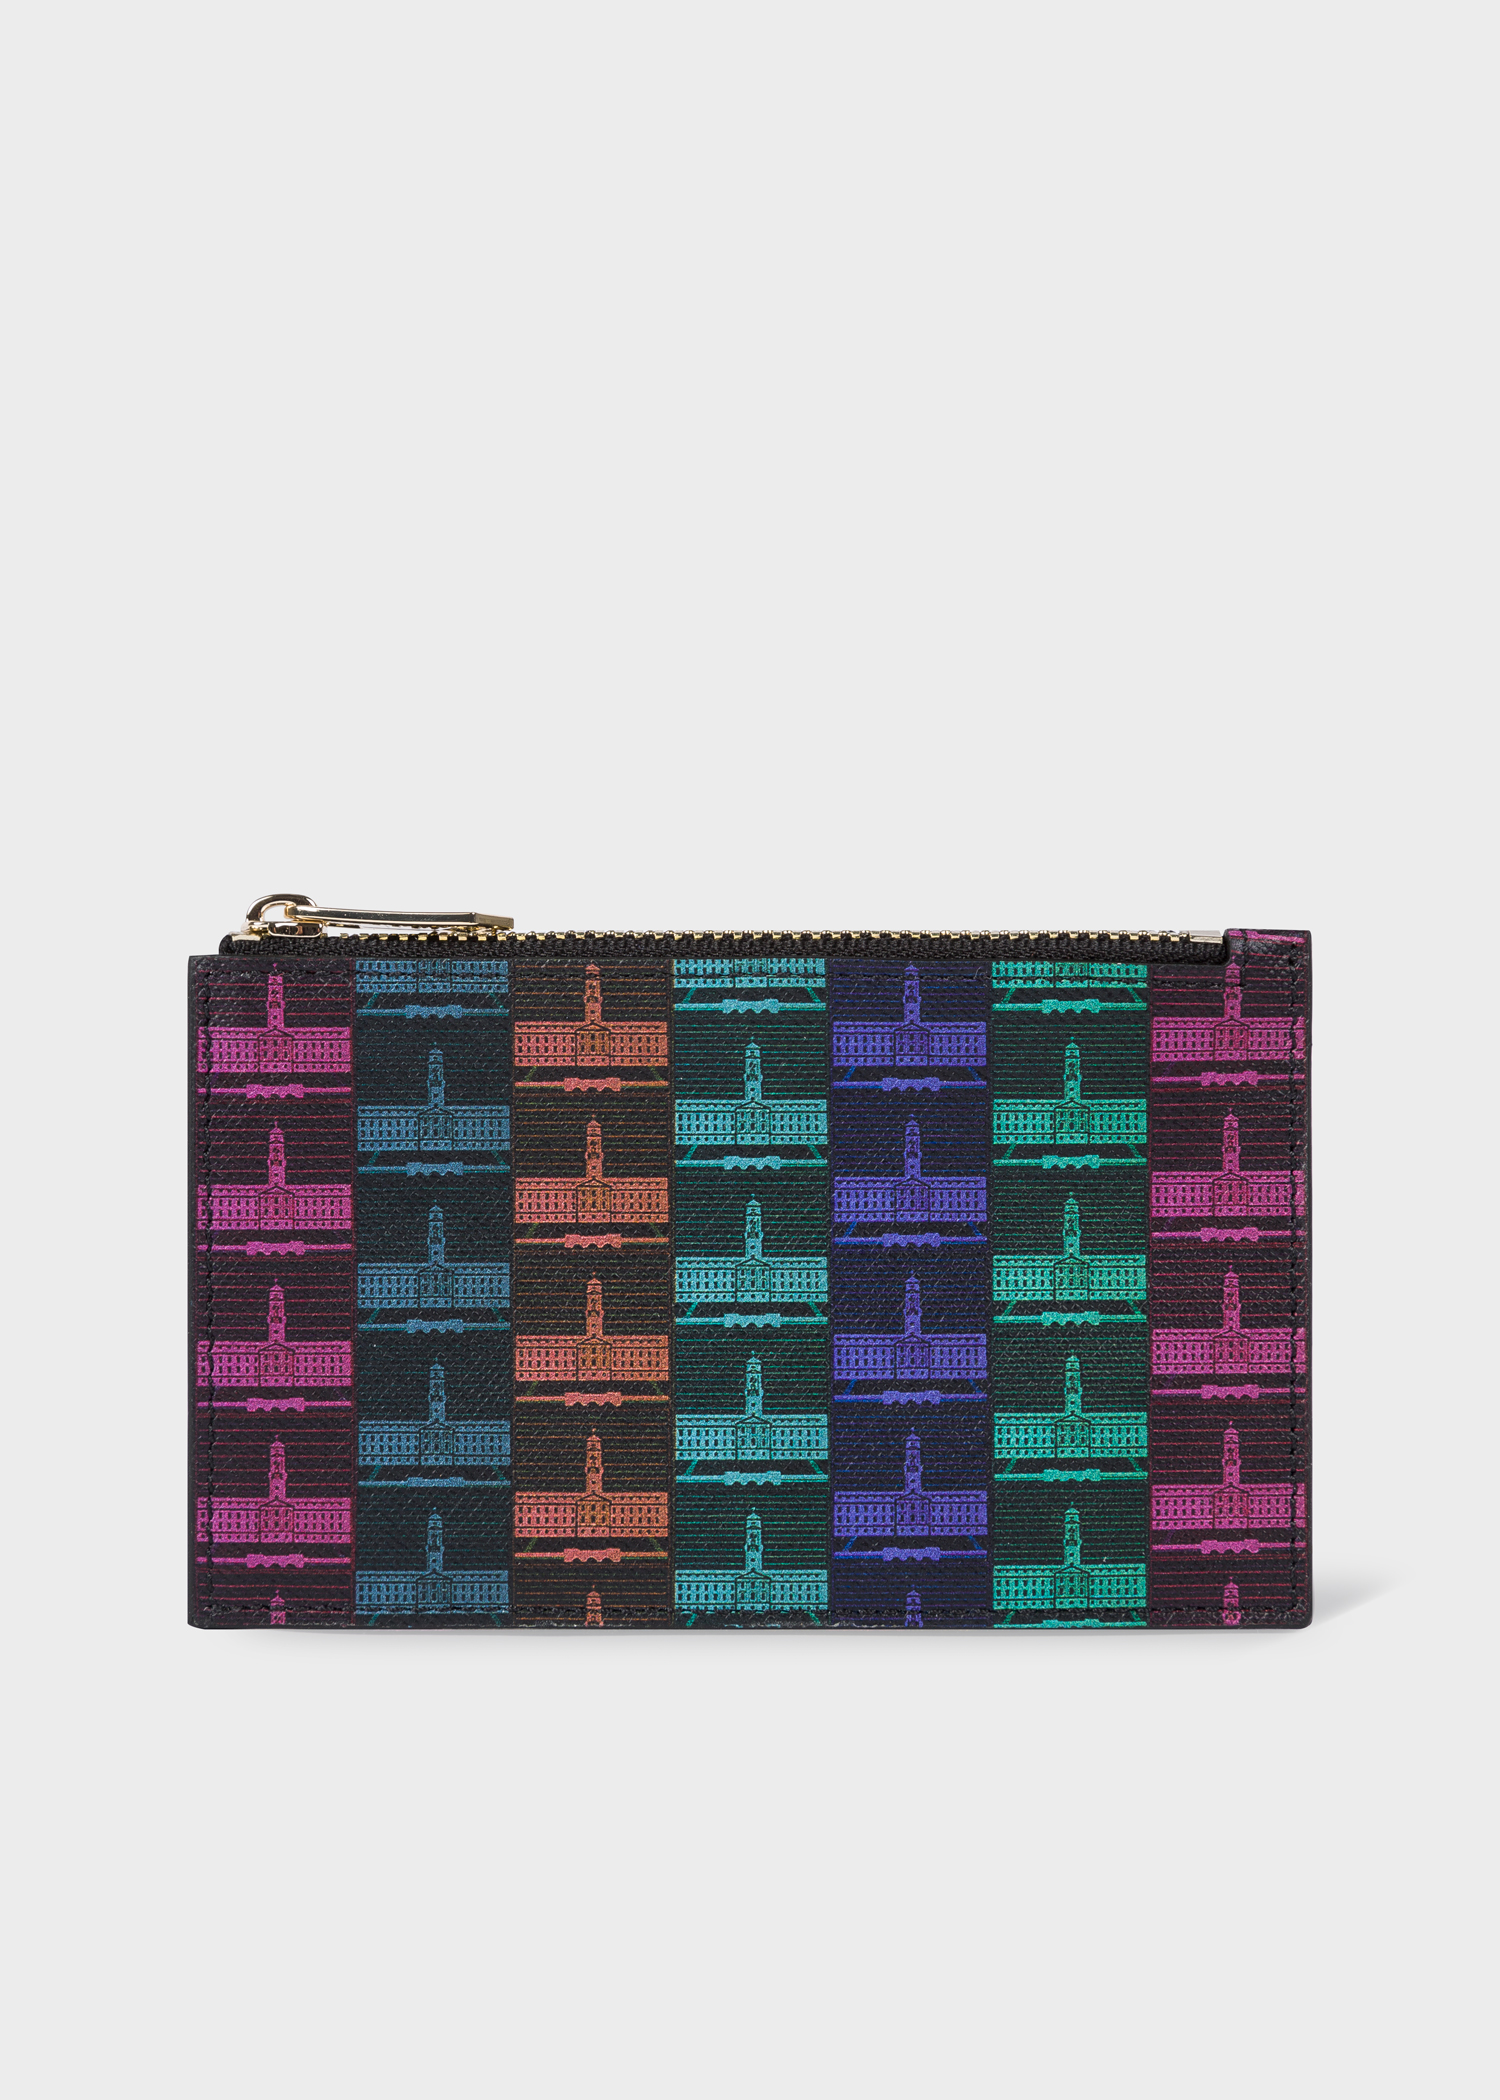 Front view - Paul Smith For University Of Nottingham - Black 'Trent Building' Leather Zip Pouch Paul Smith